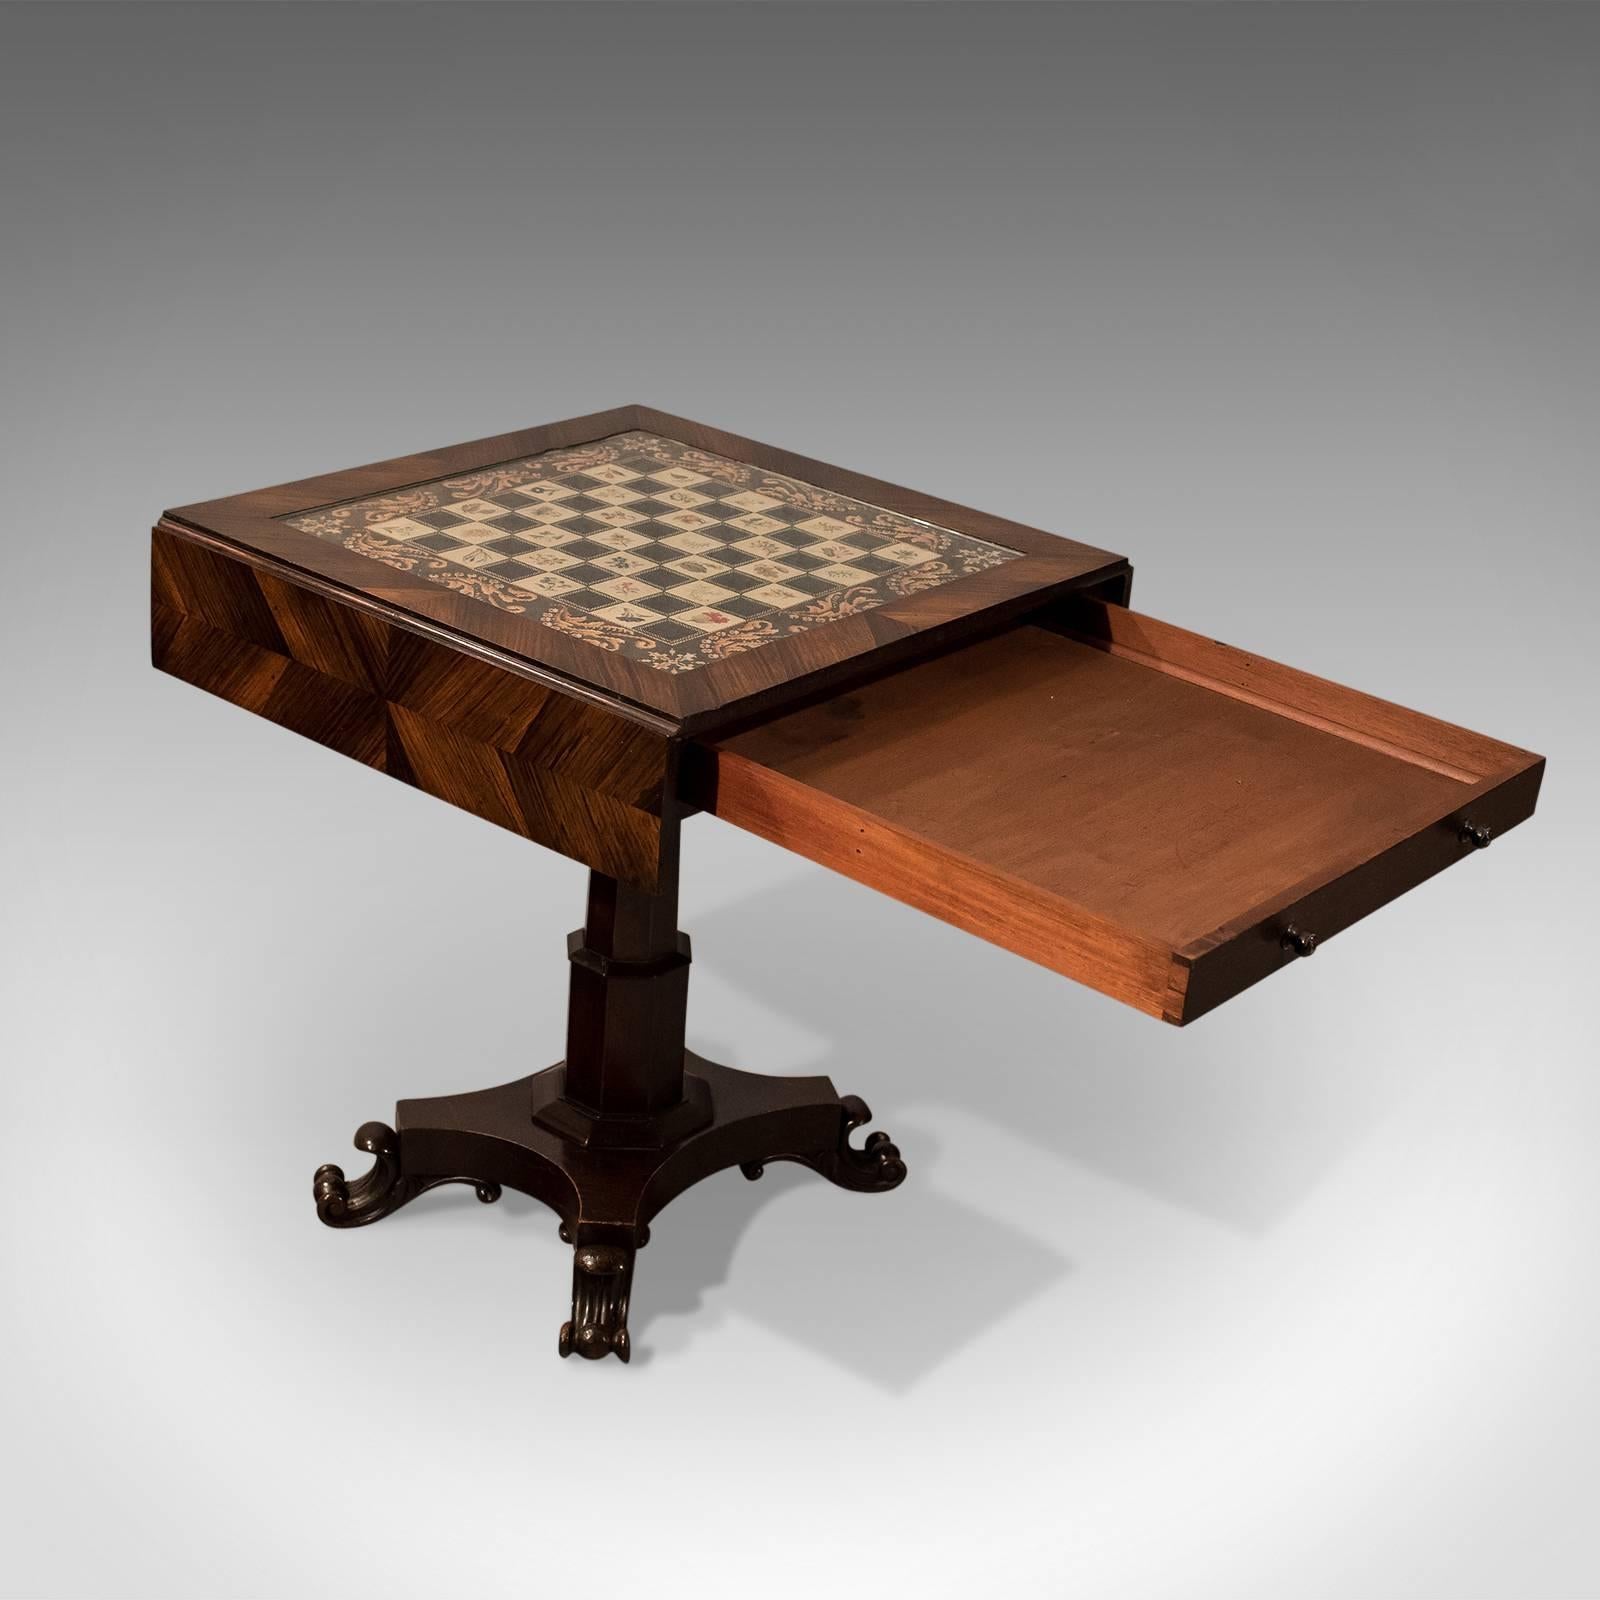 Great Britain (UK) Antique Chess Board Games Table, Quality English Regency in Kingwood, circa 1820